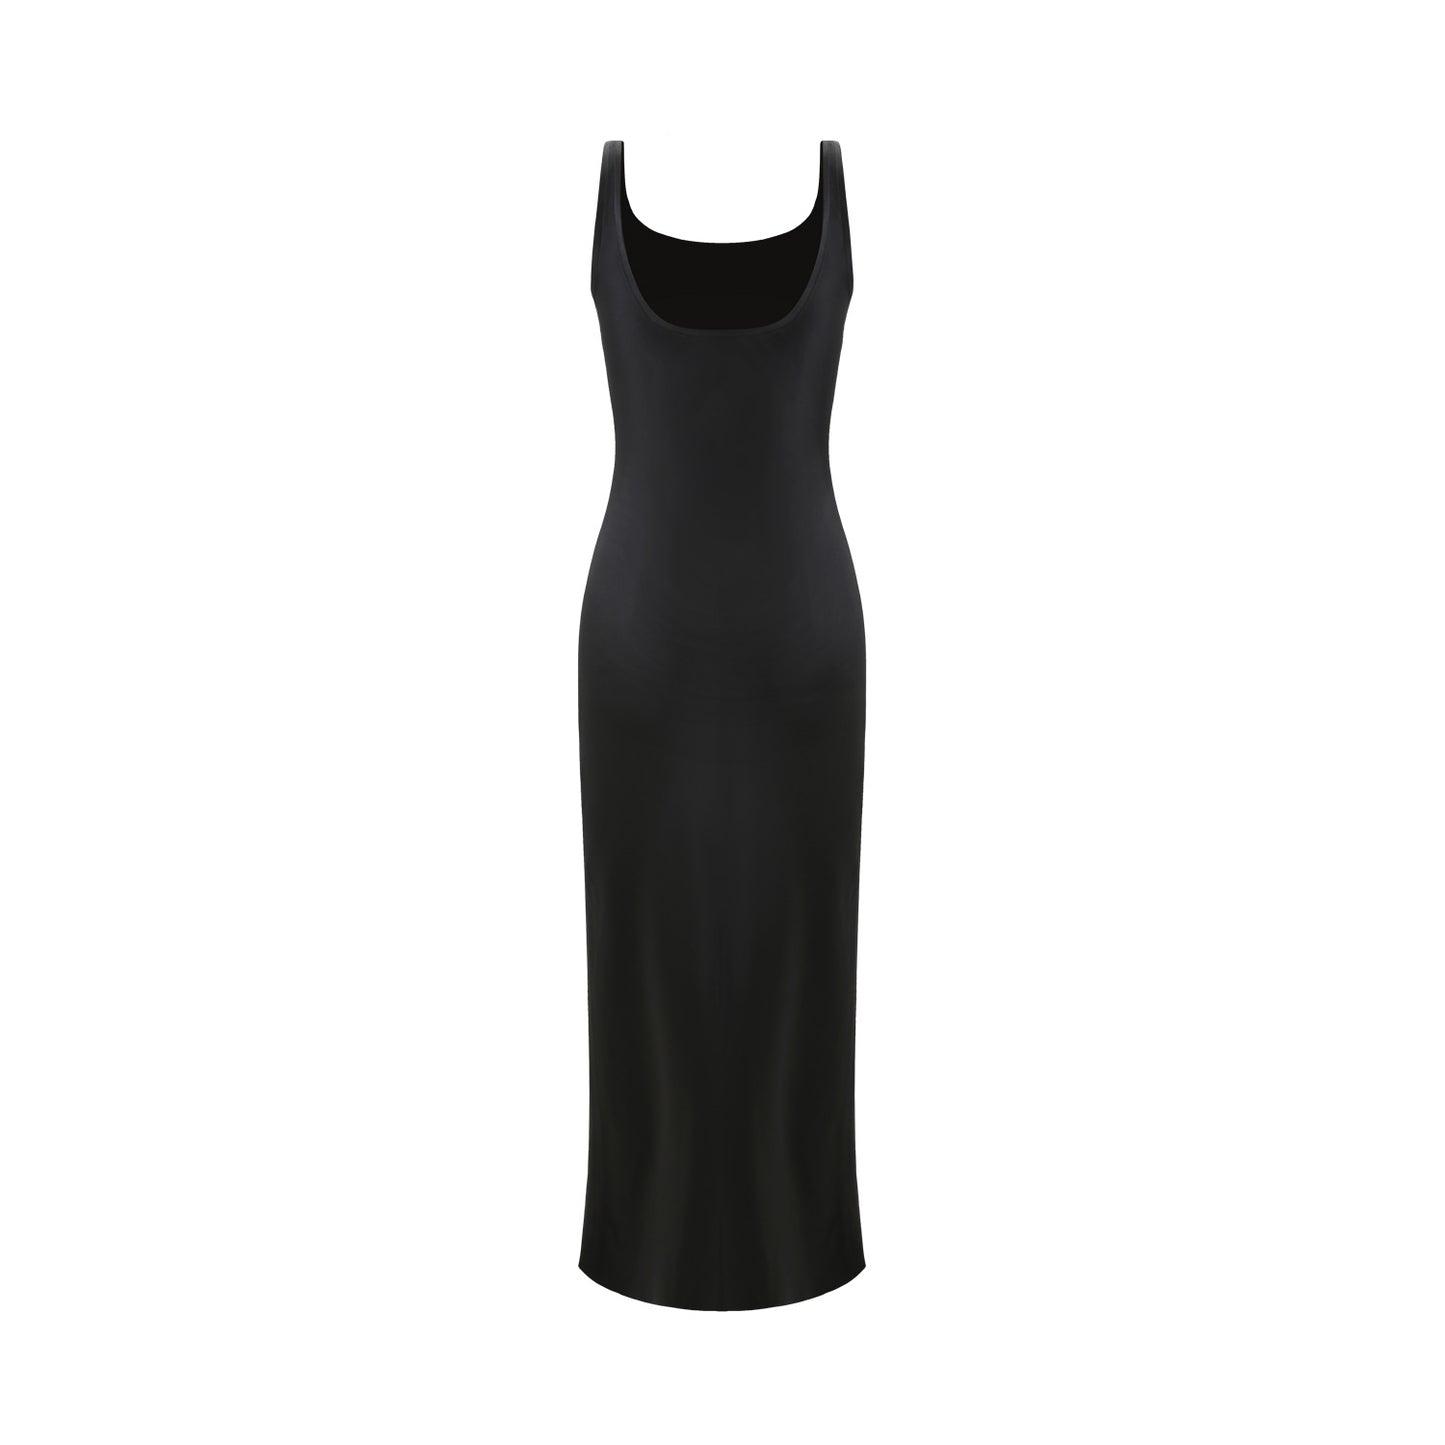 Fitted mid-length hip-wrapping dress